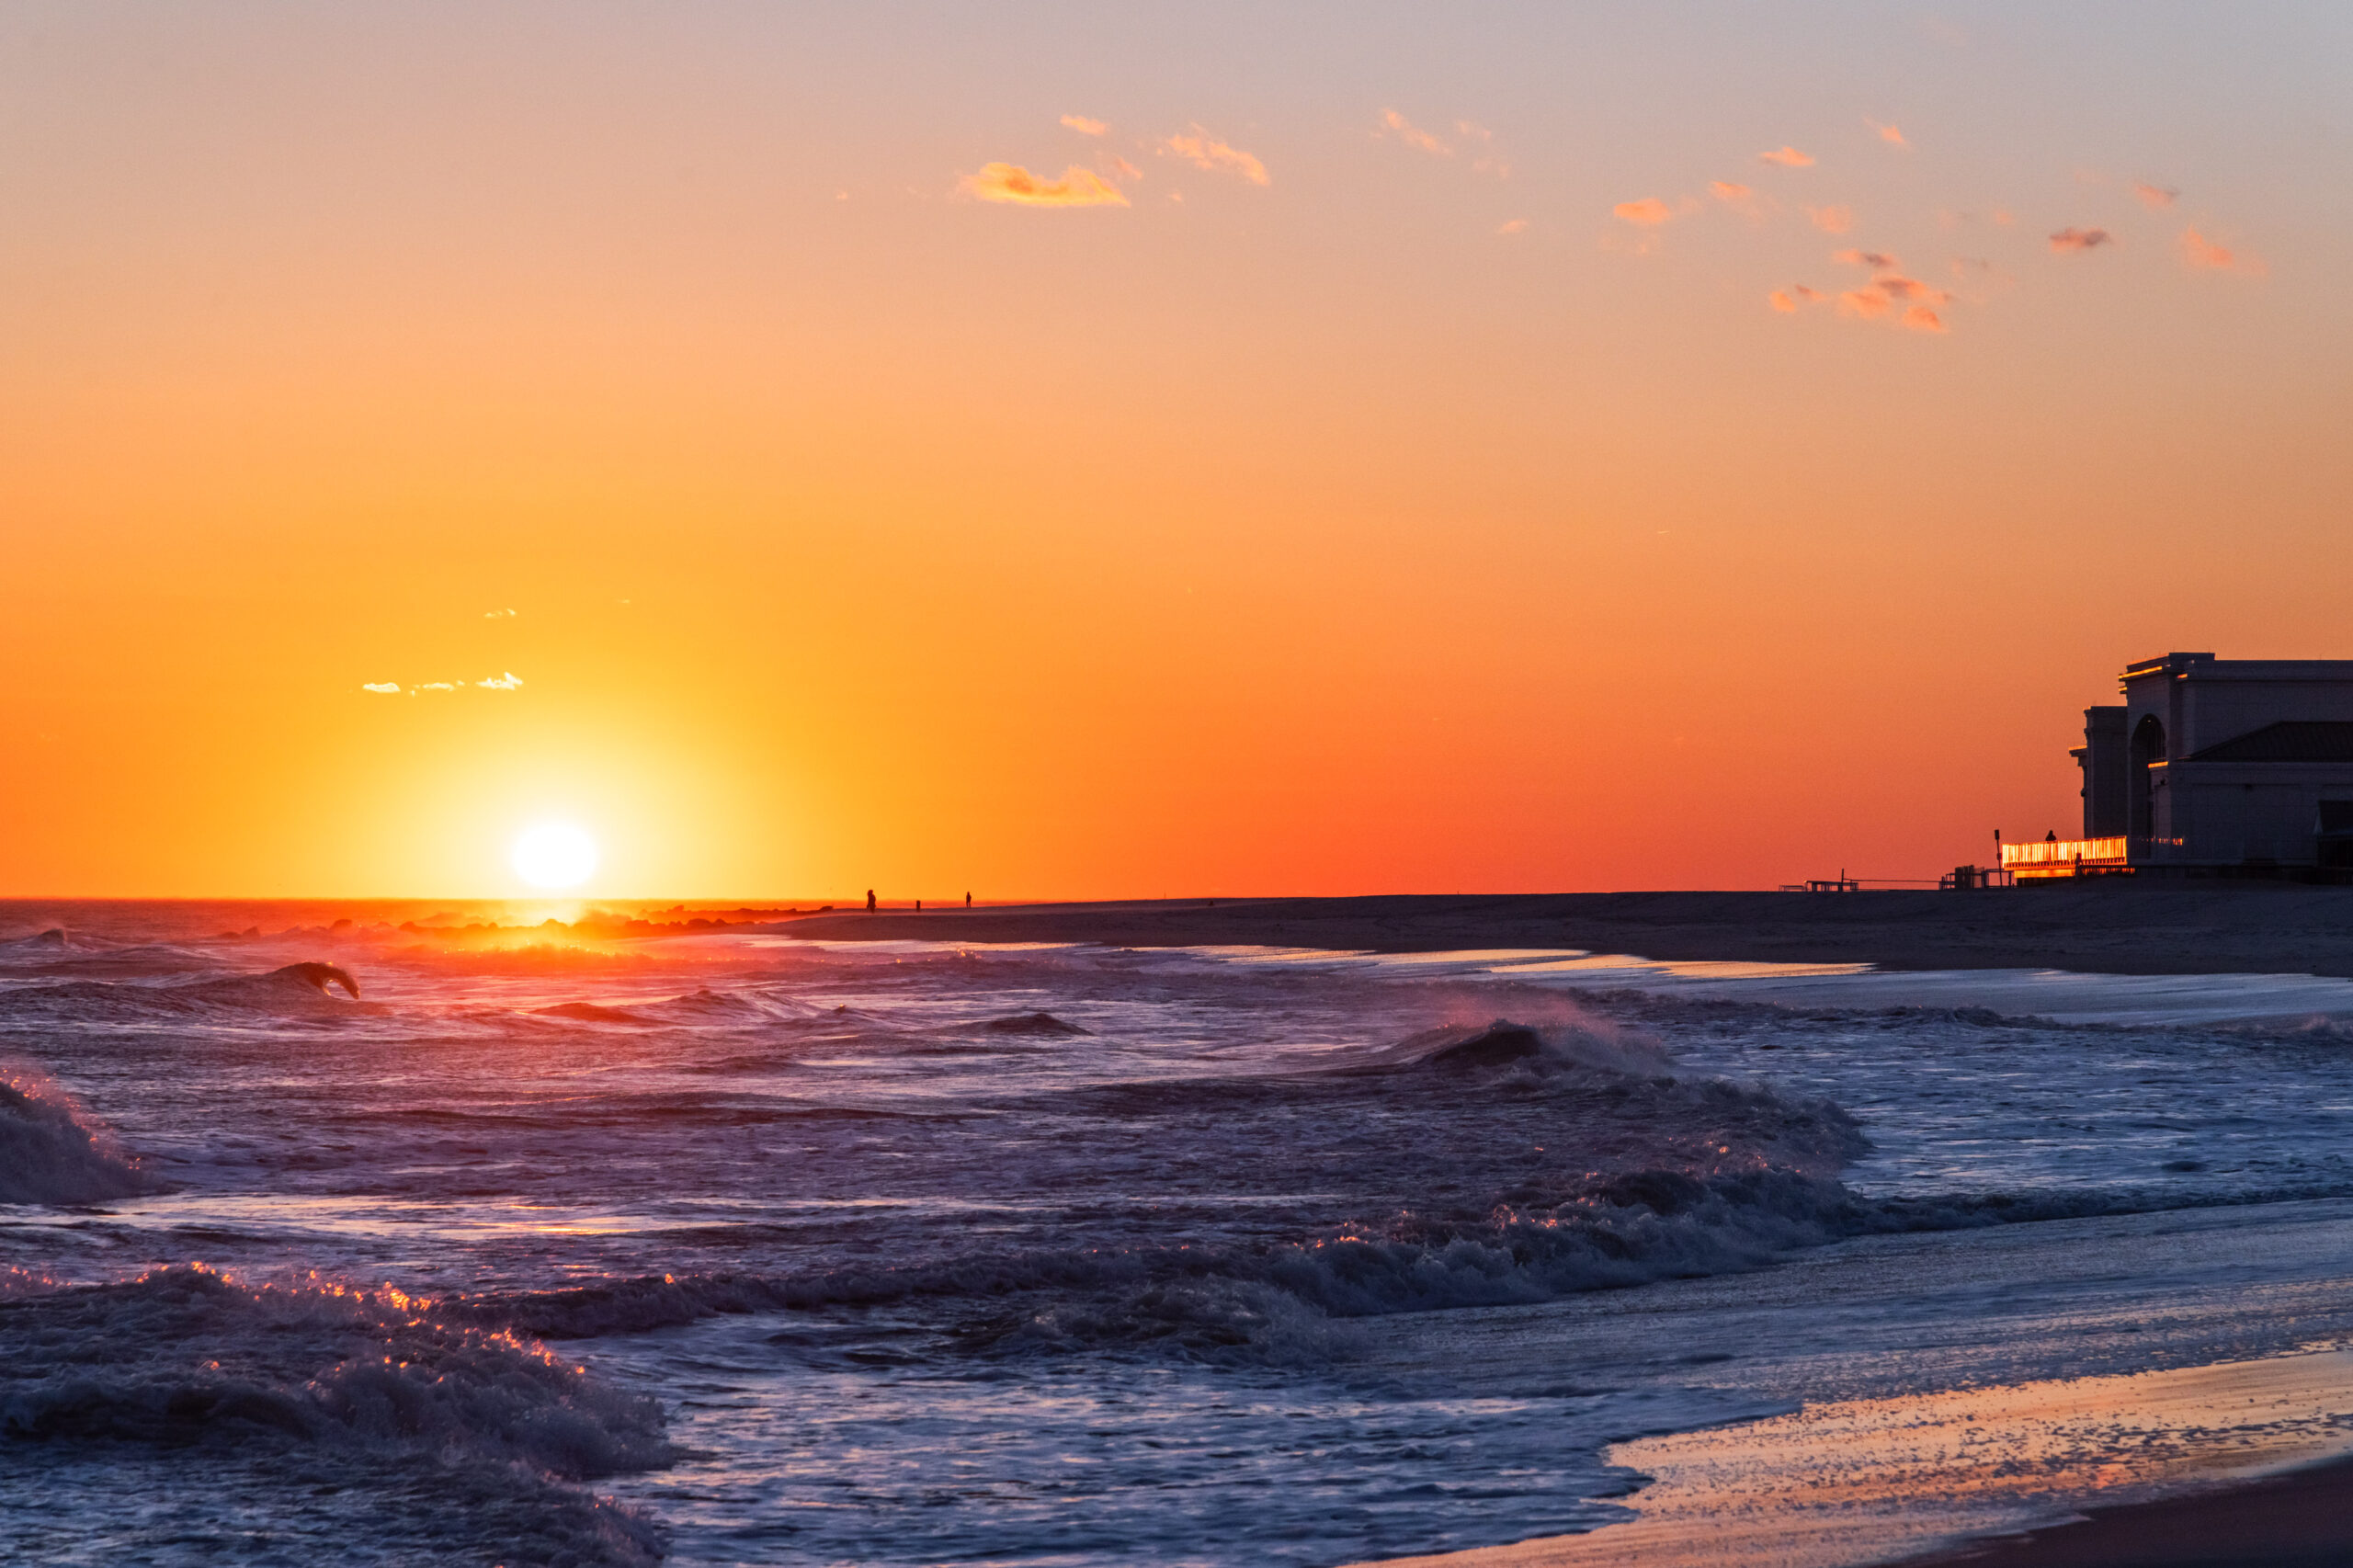 The sun setting in a clear orange sky with waves crashing on the beach. The sun is shining off of the Cape May Convention Center in the distance.